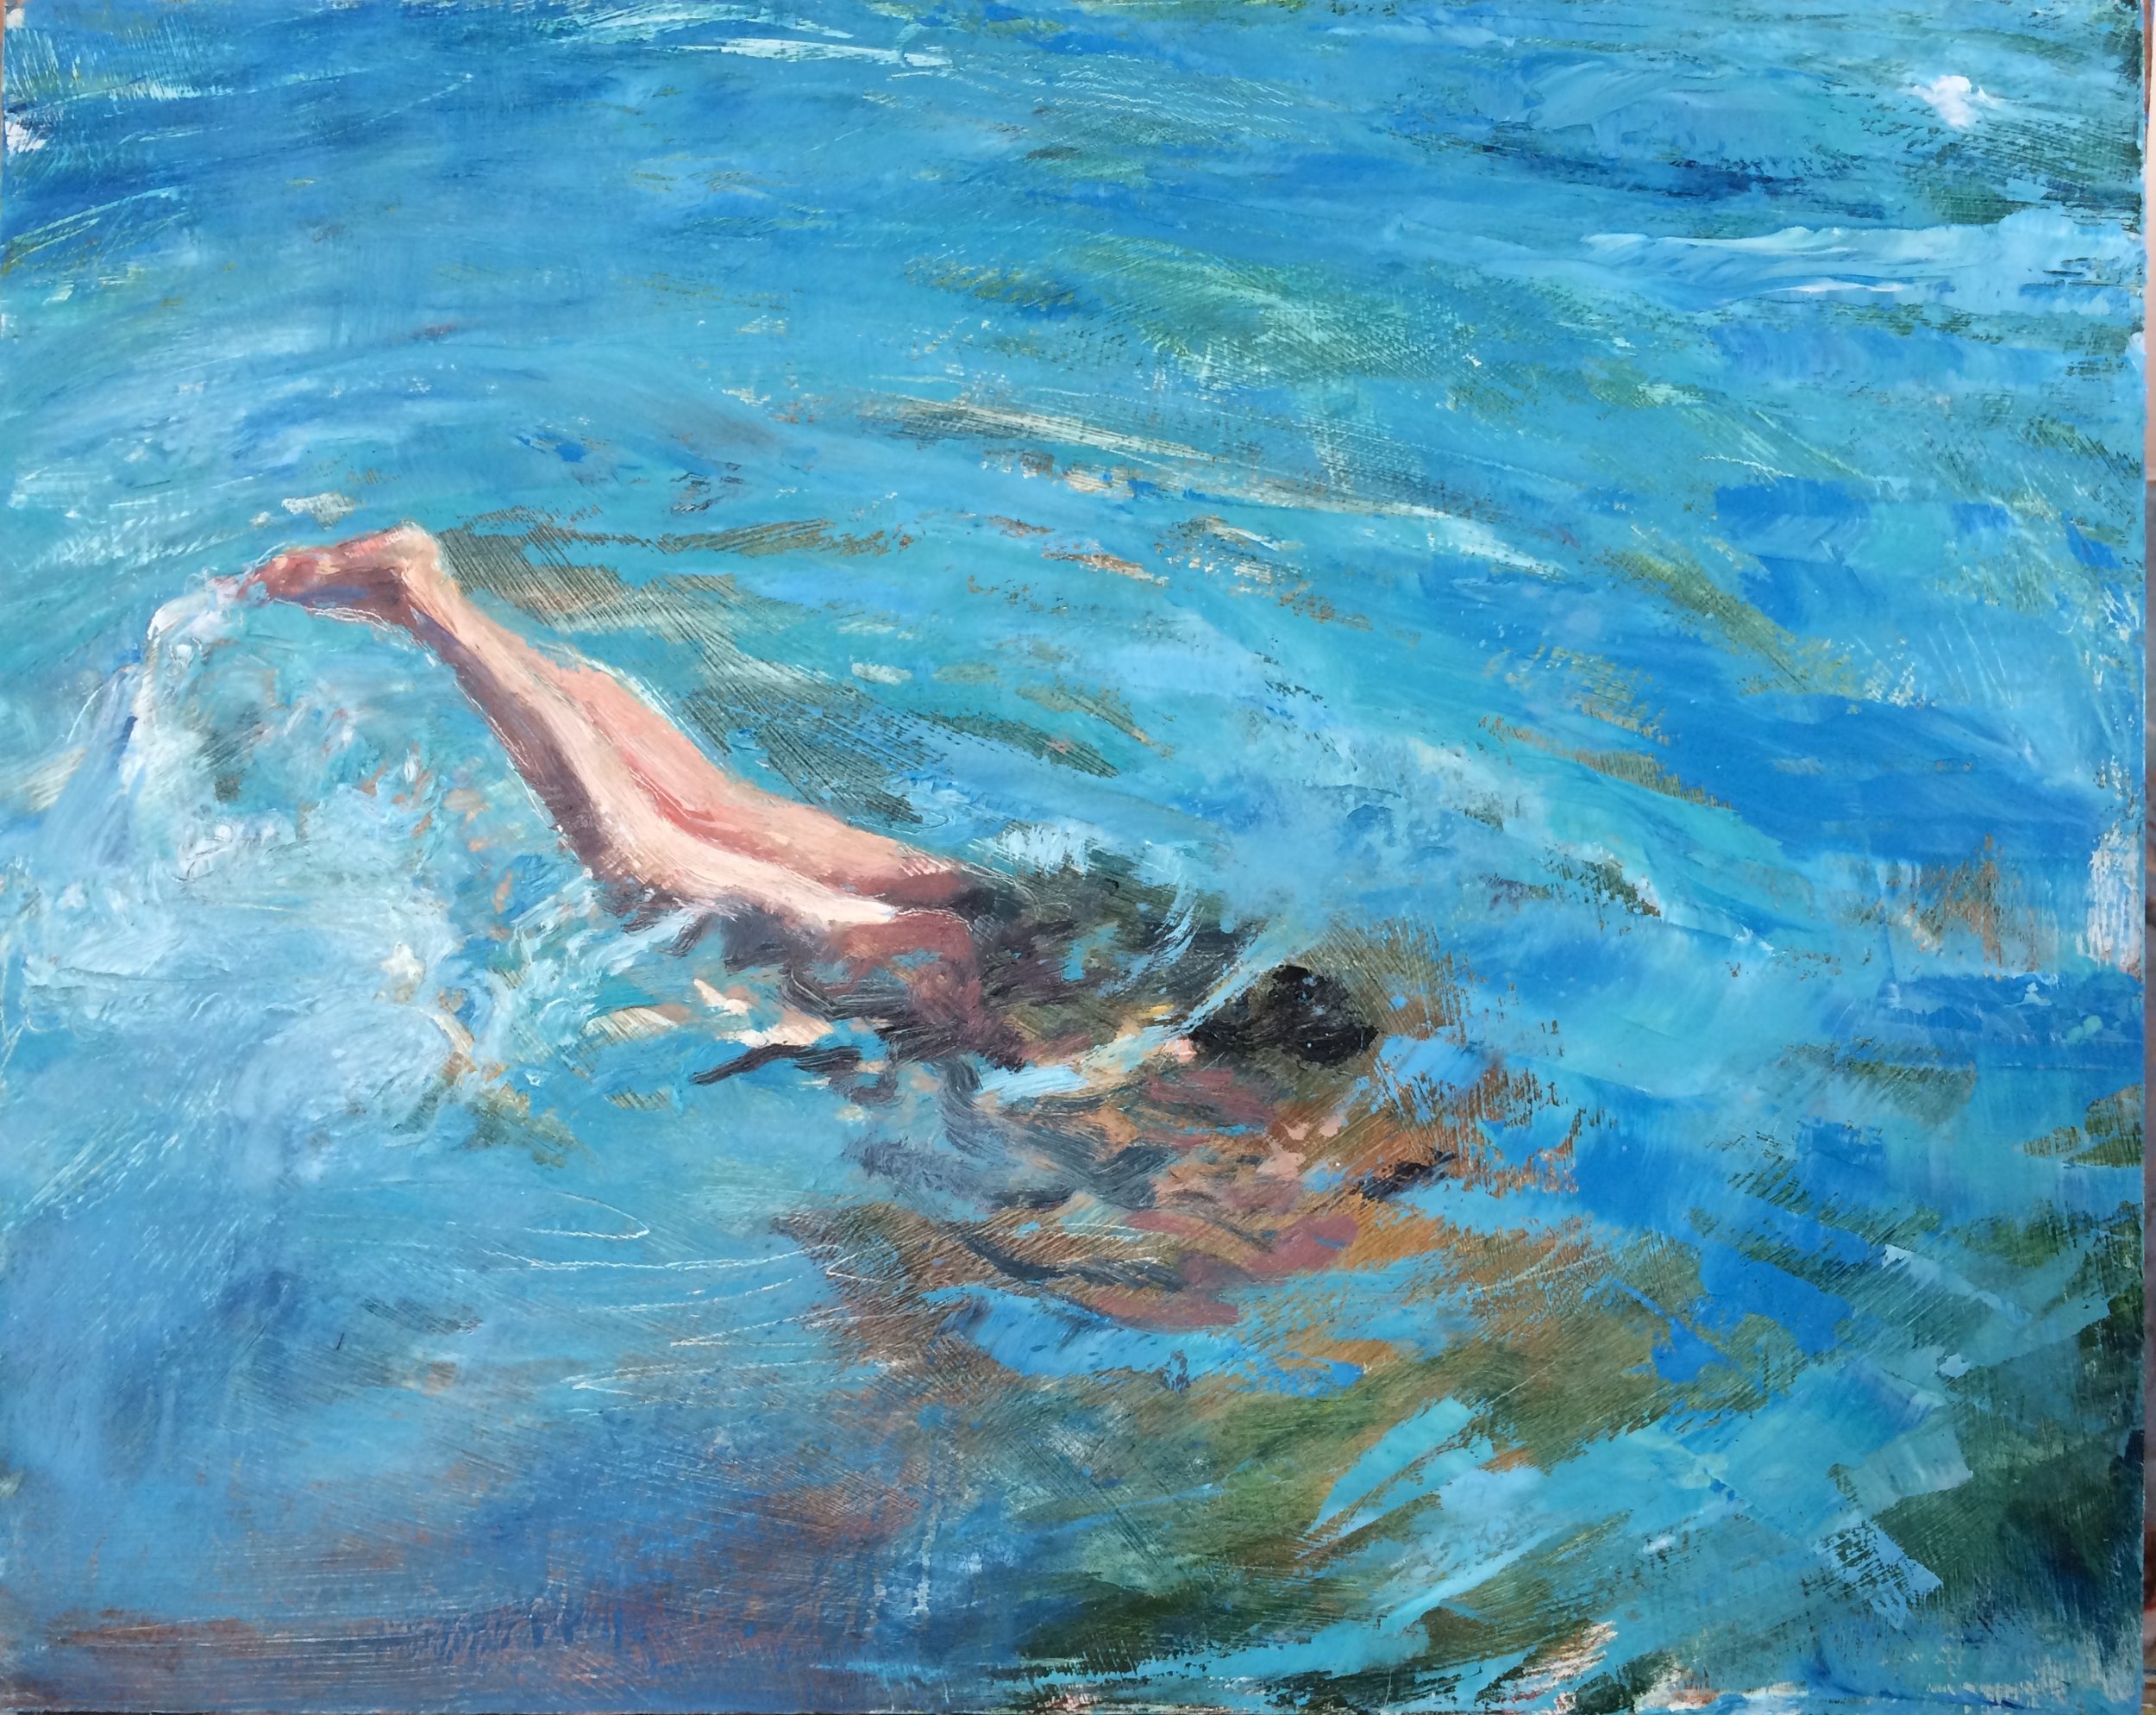 Dive, 2016 oil on panel, 16" x 20" 🔴